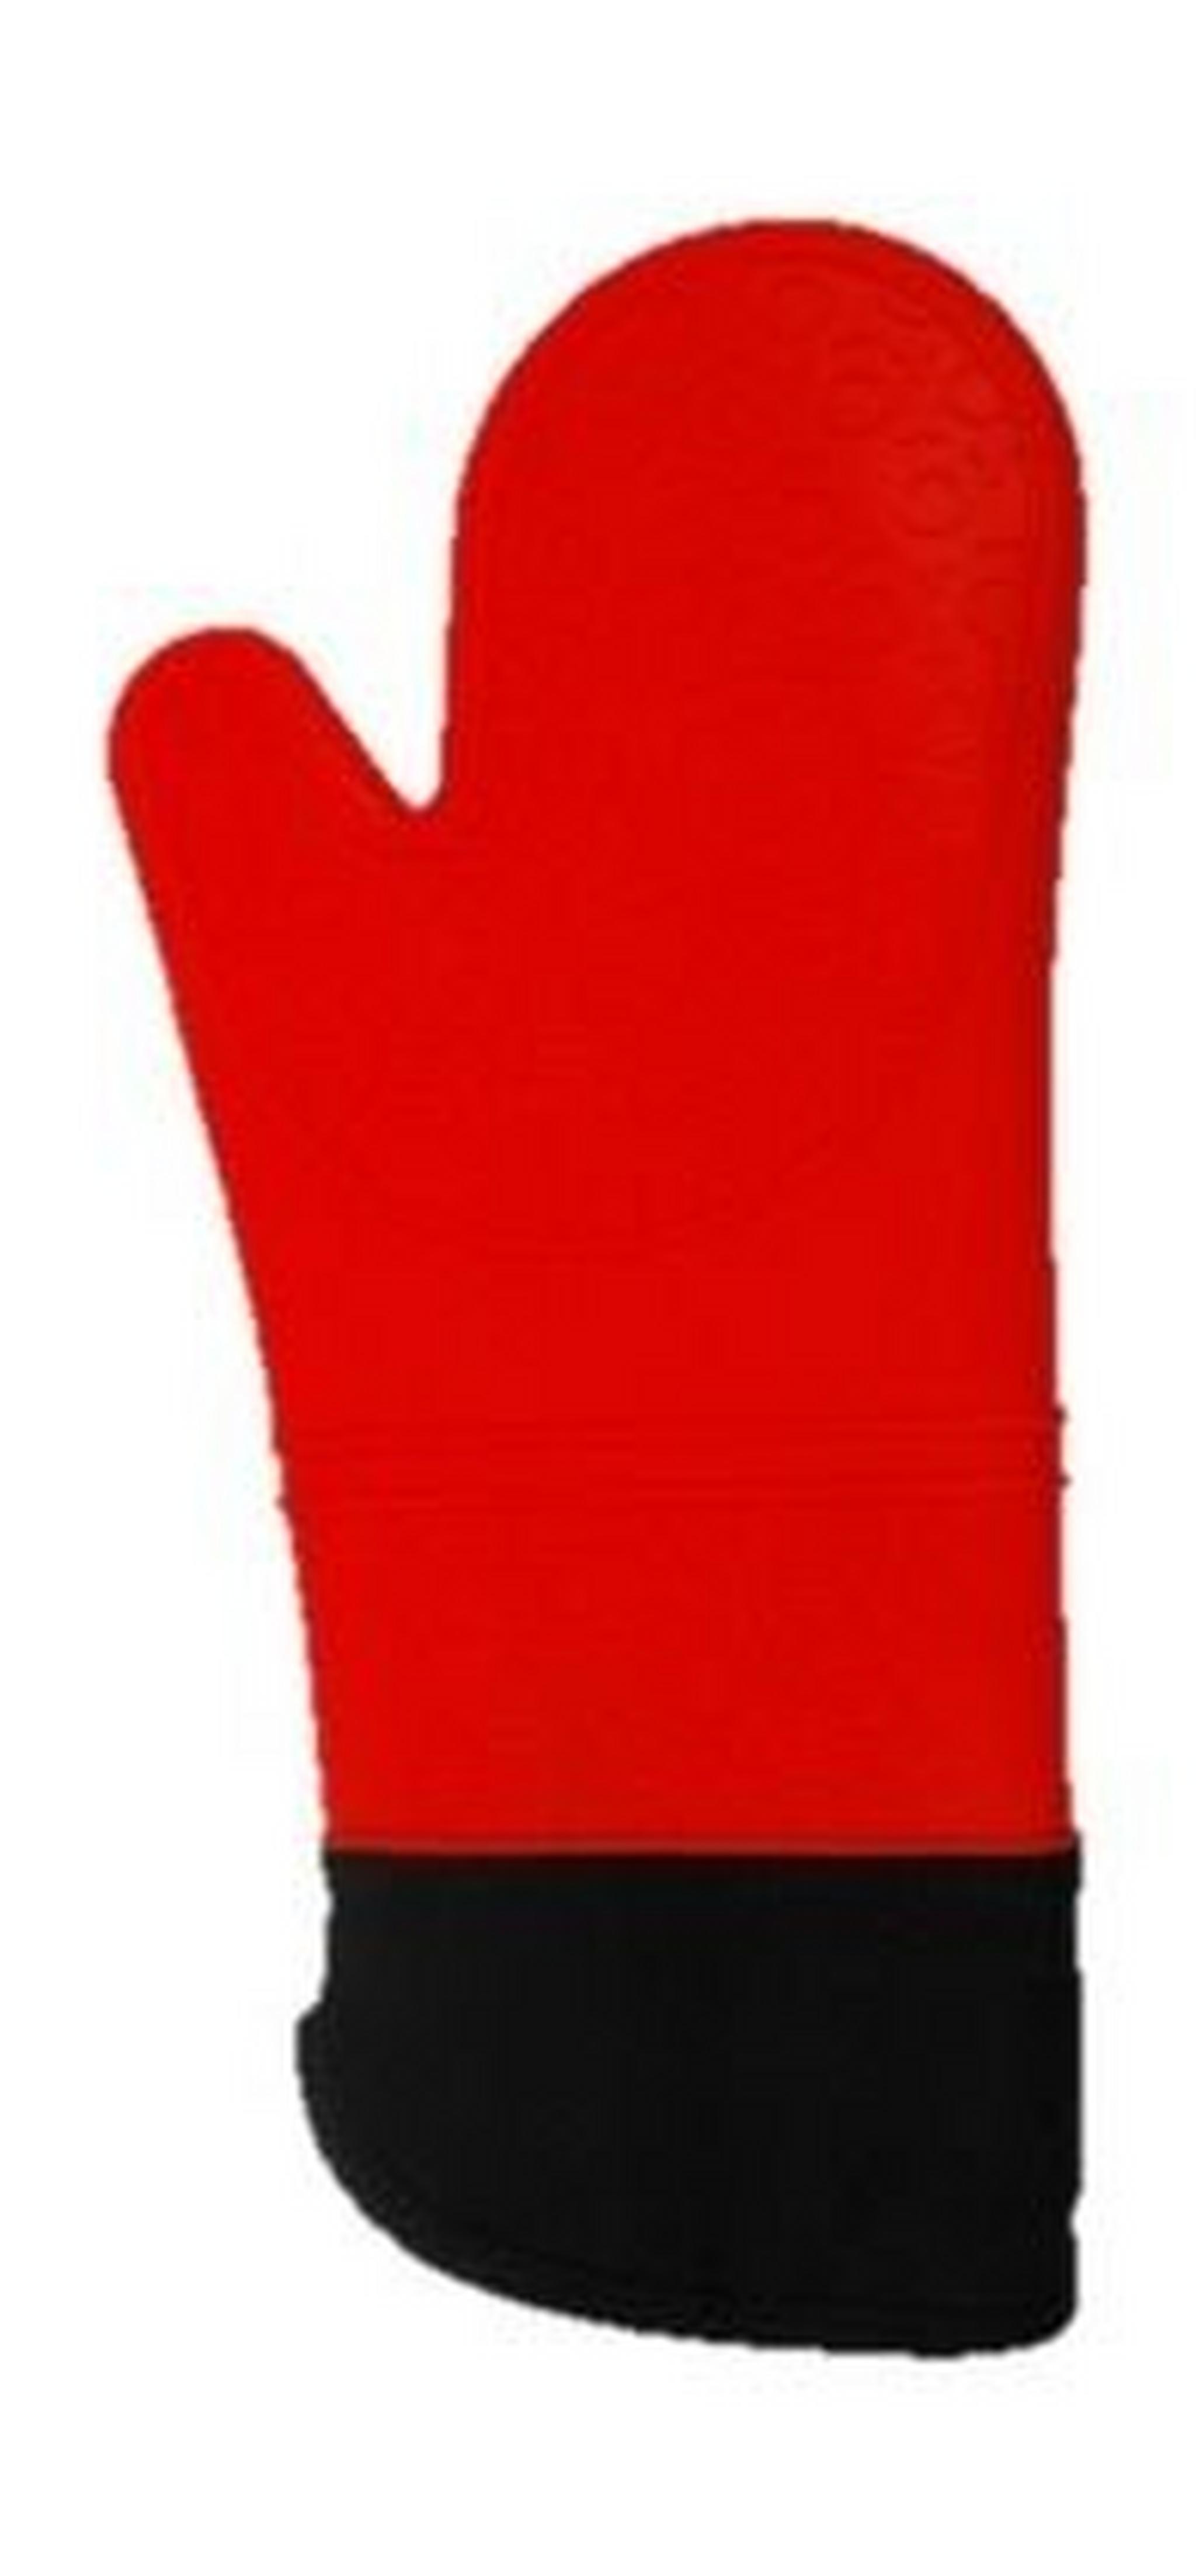 Extra Joy Silicone Oven Mitten – Red